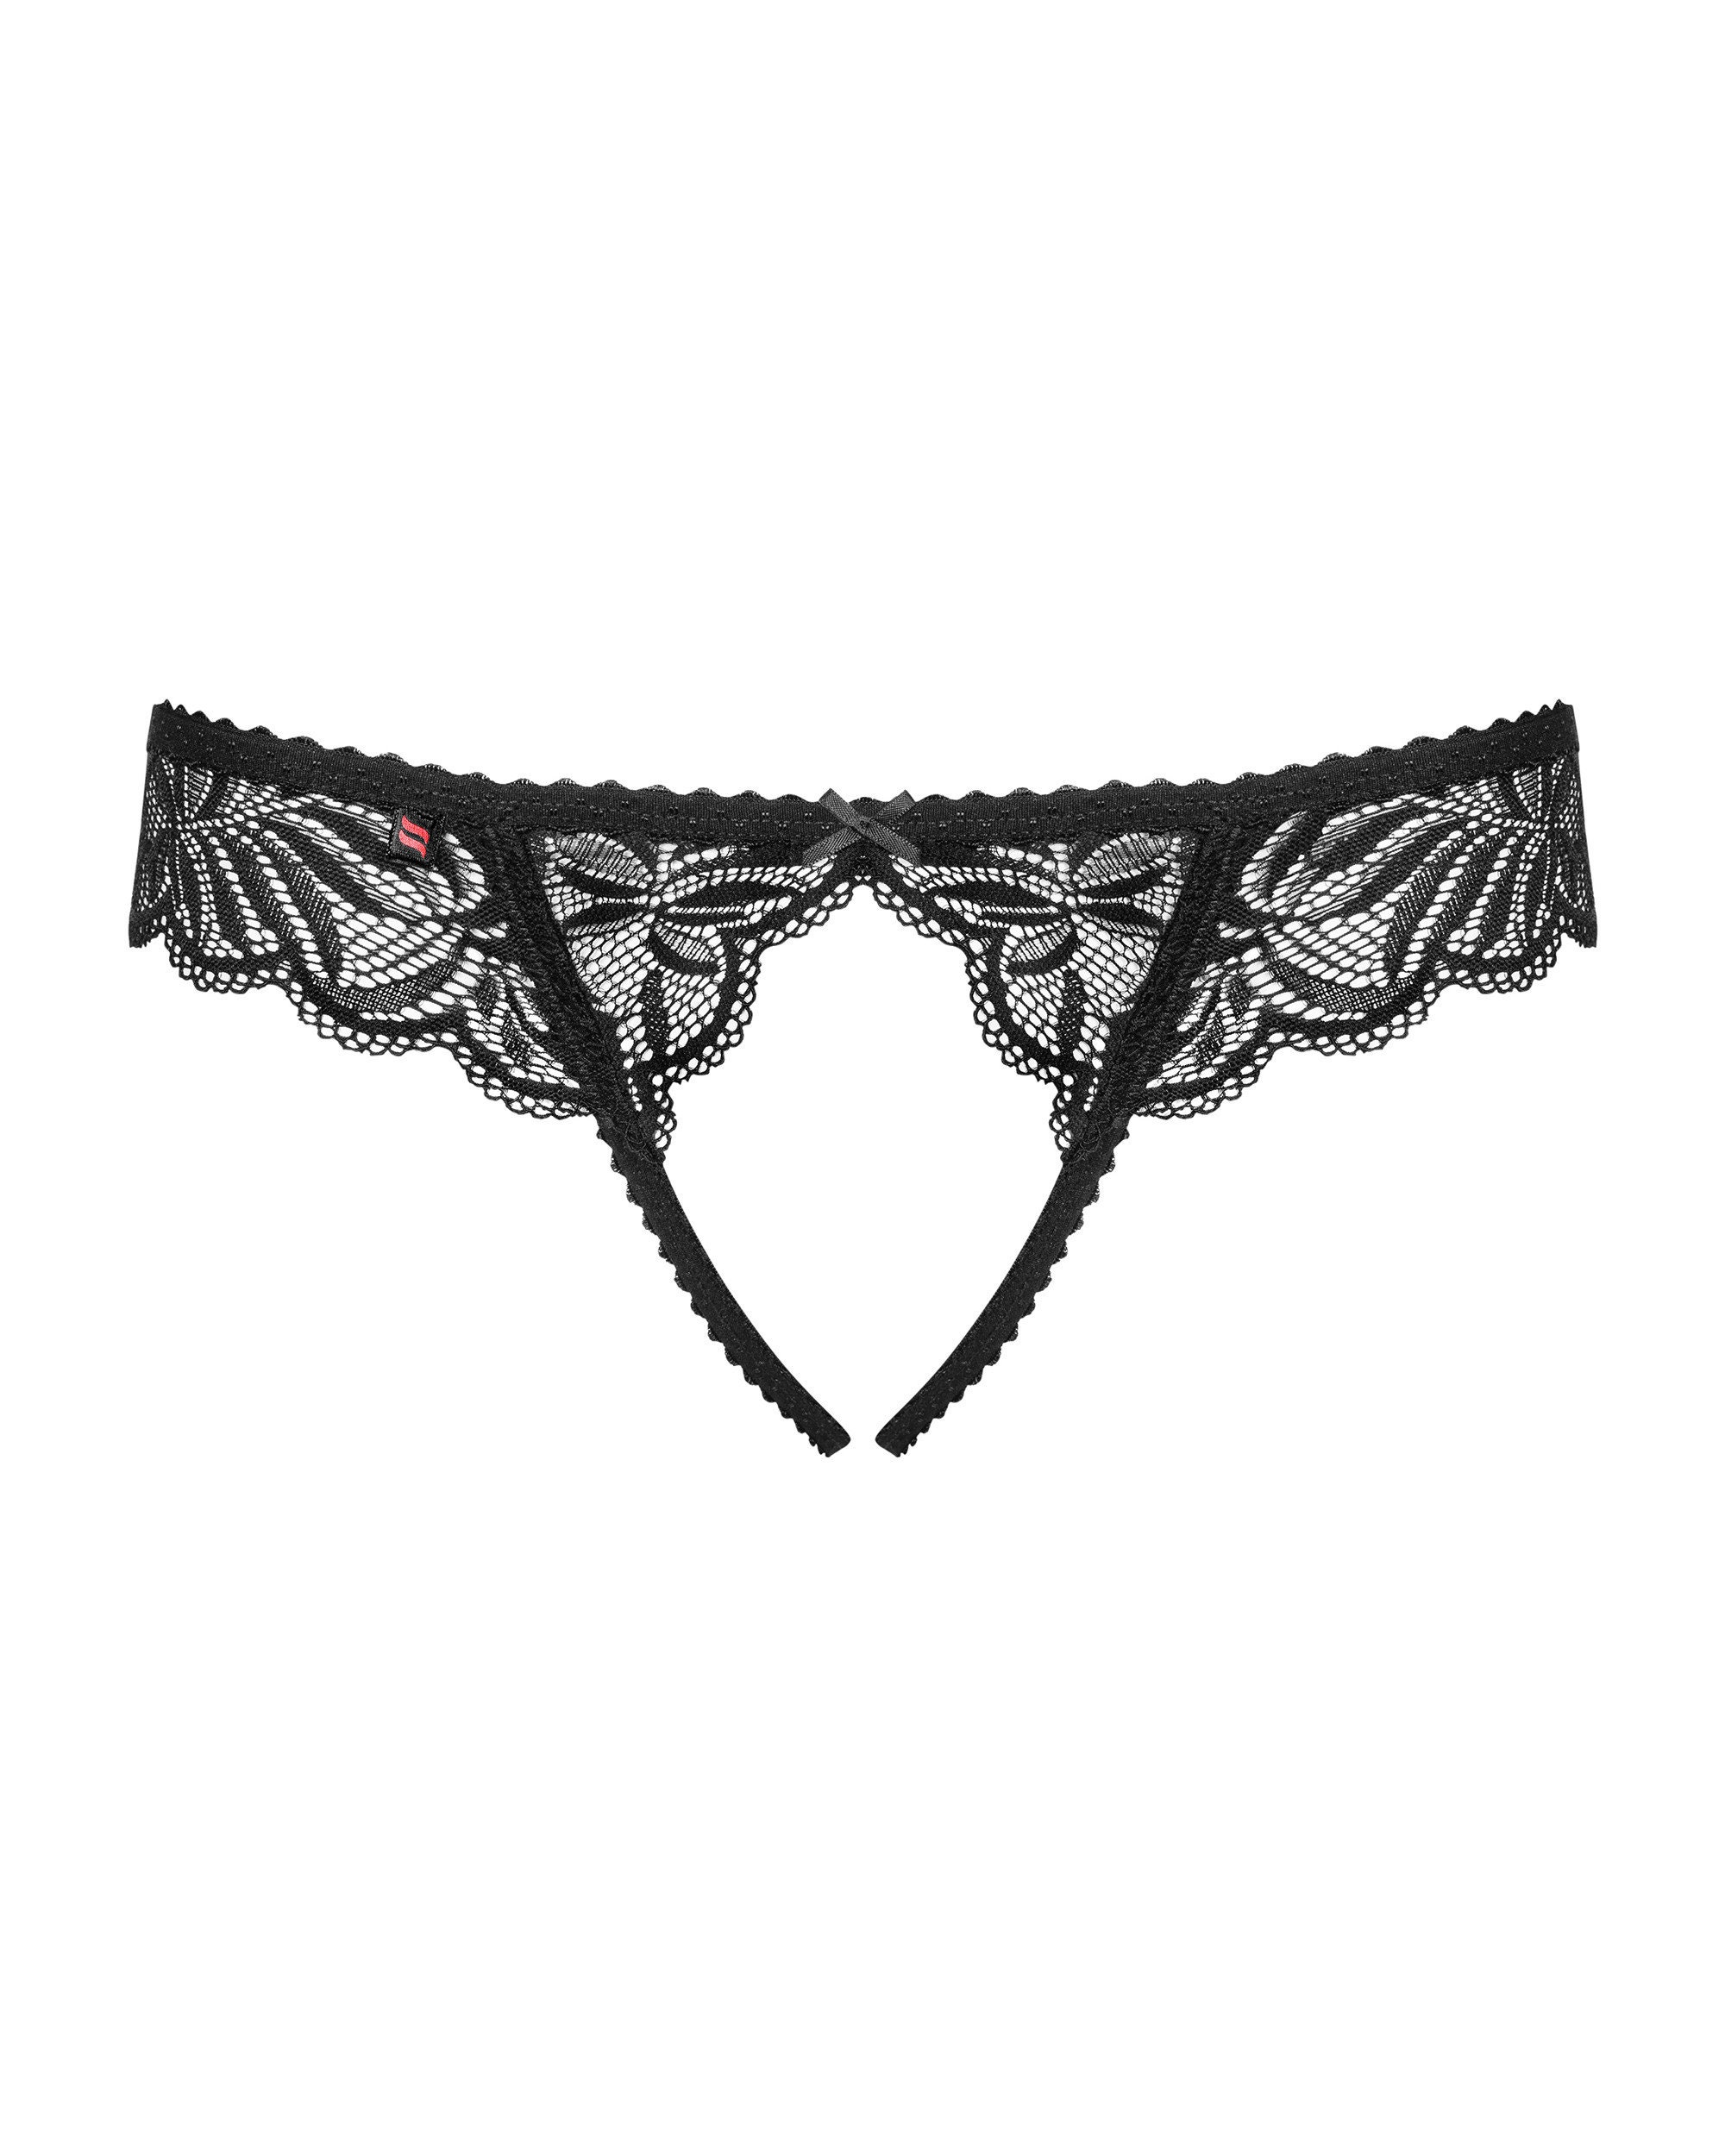 Contica Black Crotchless Thong Open Crotch Ouvert Panties See Through G